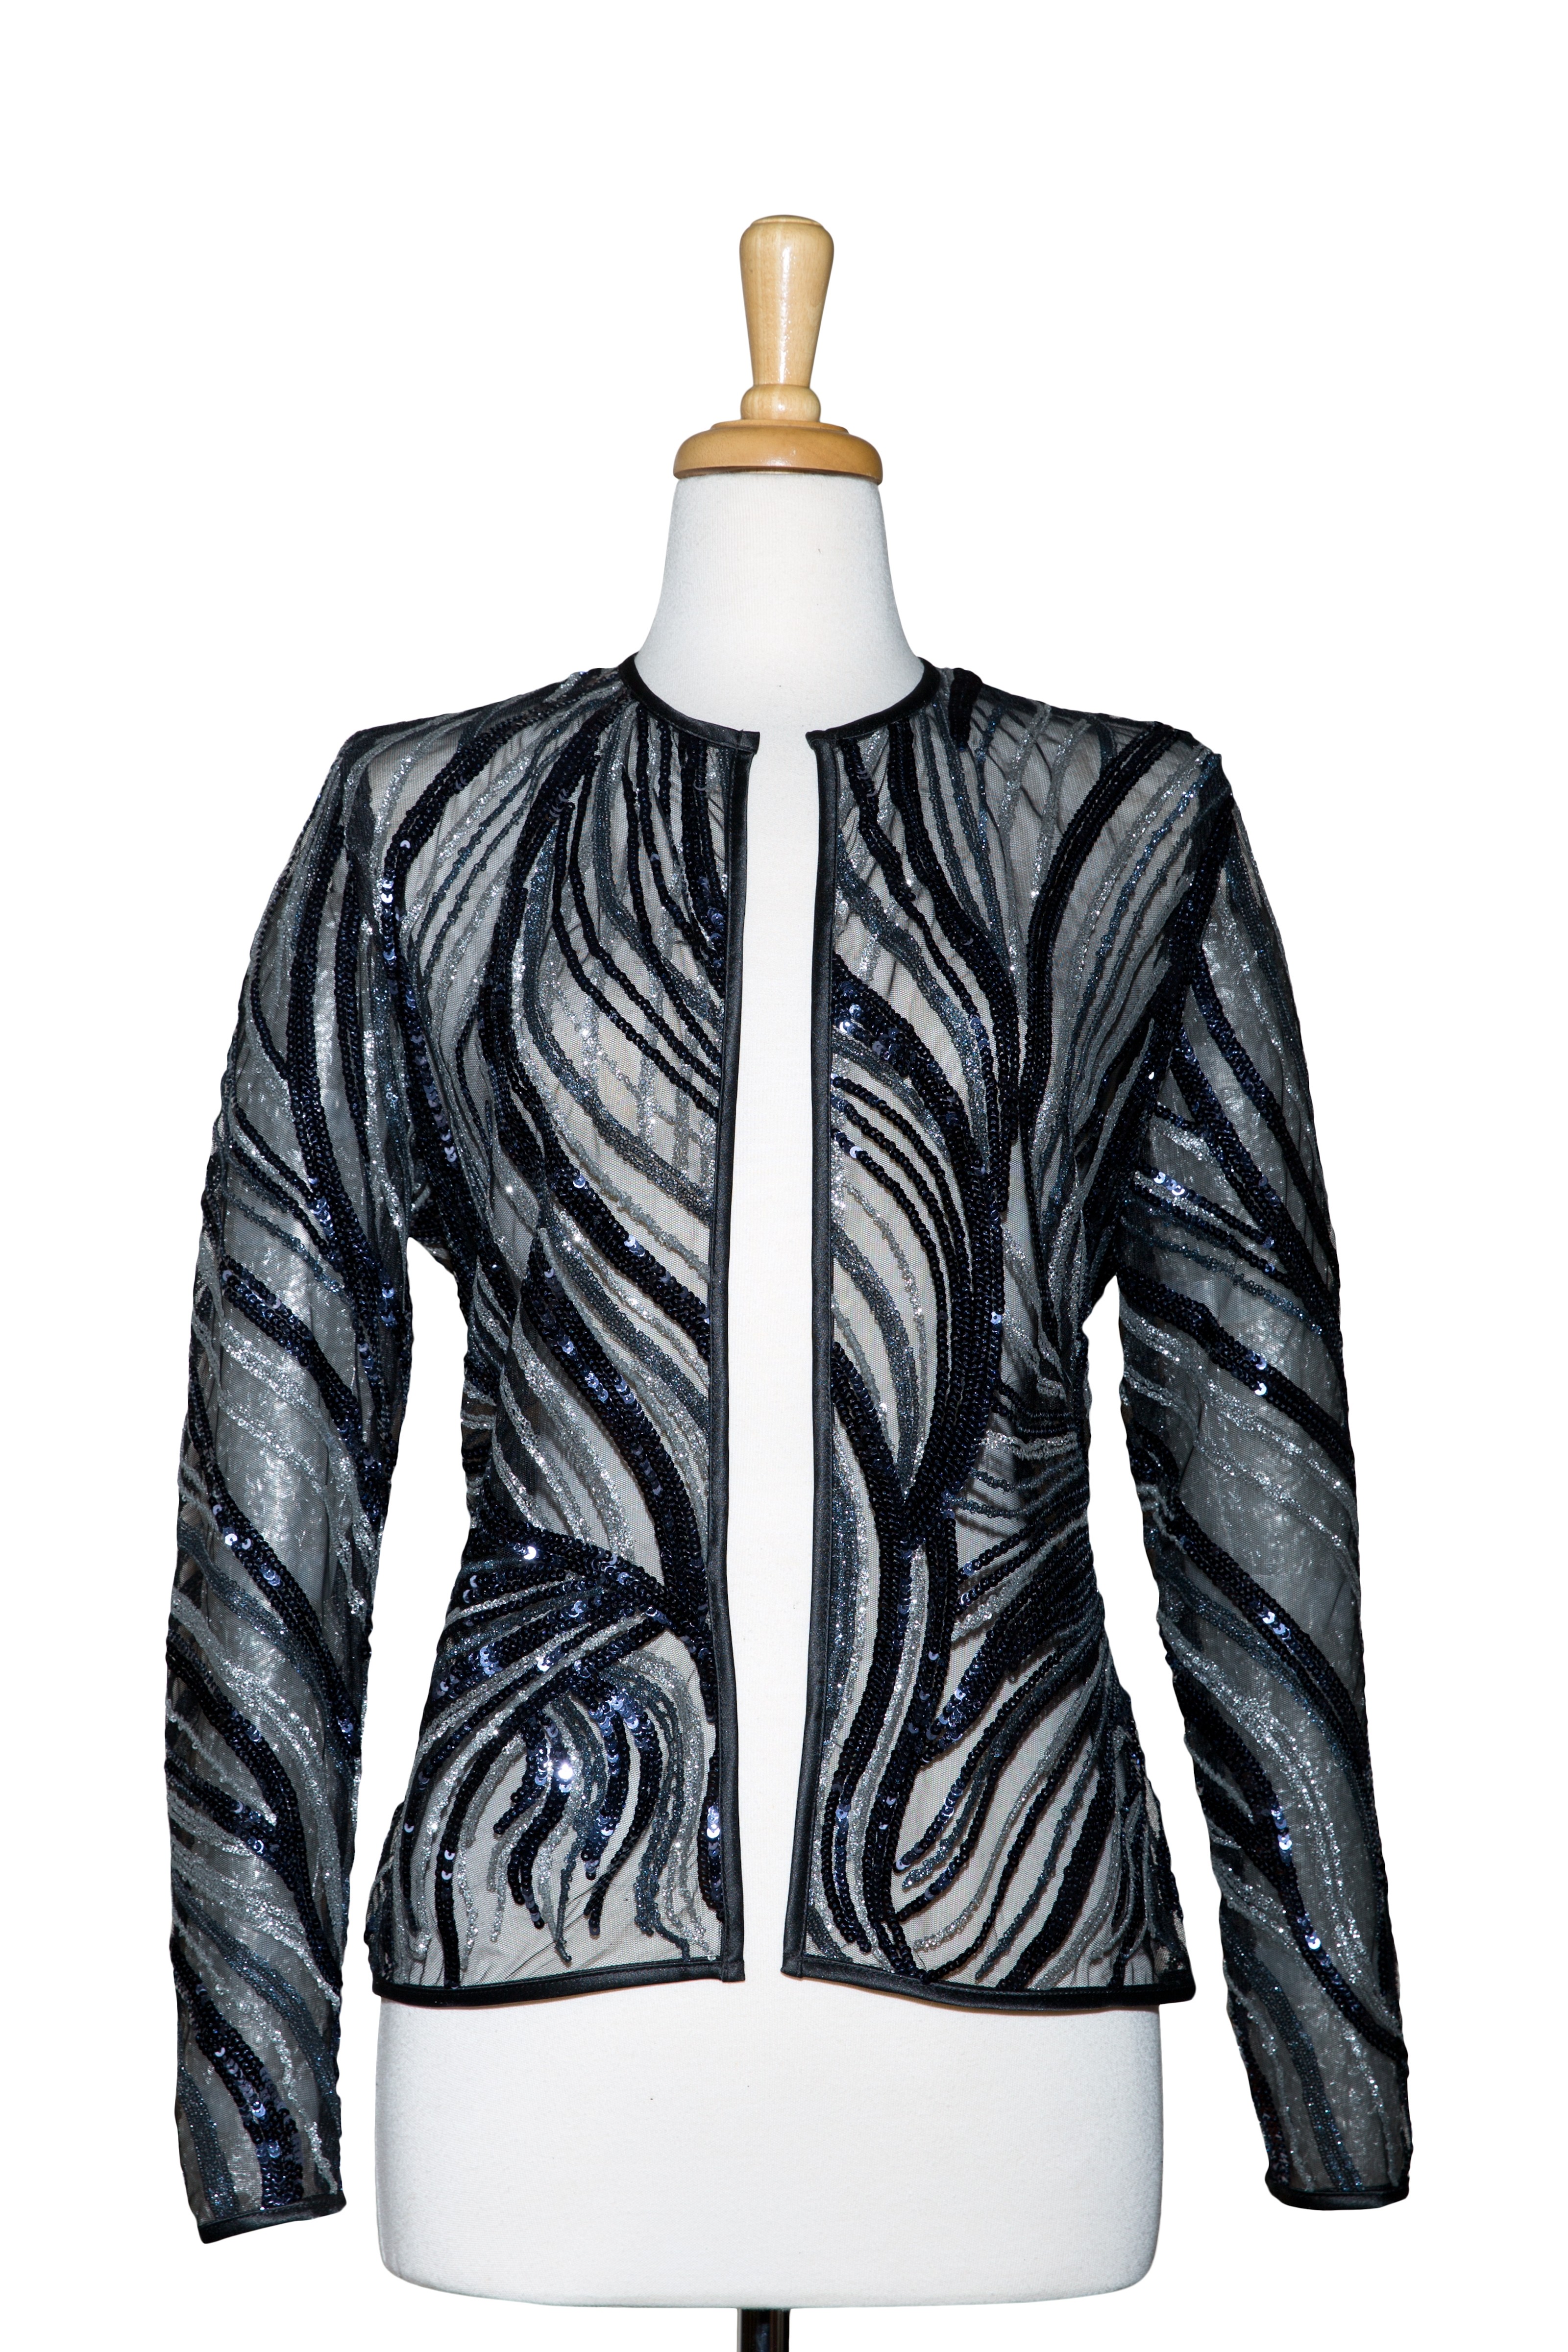  Navy, Silver, and Black Sequins Lace  Jacket 